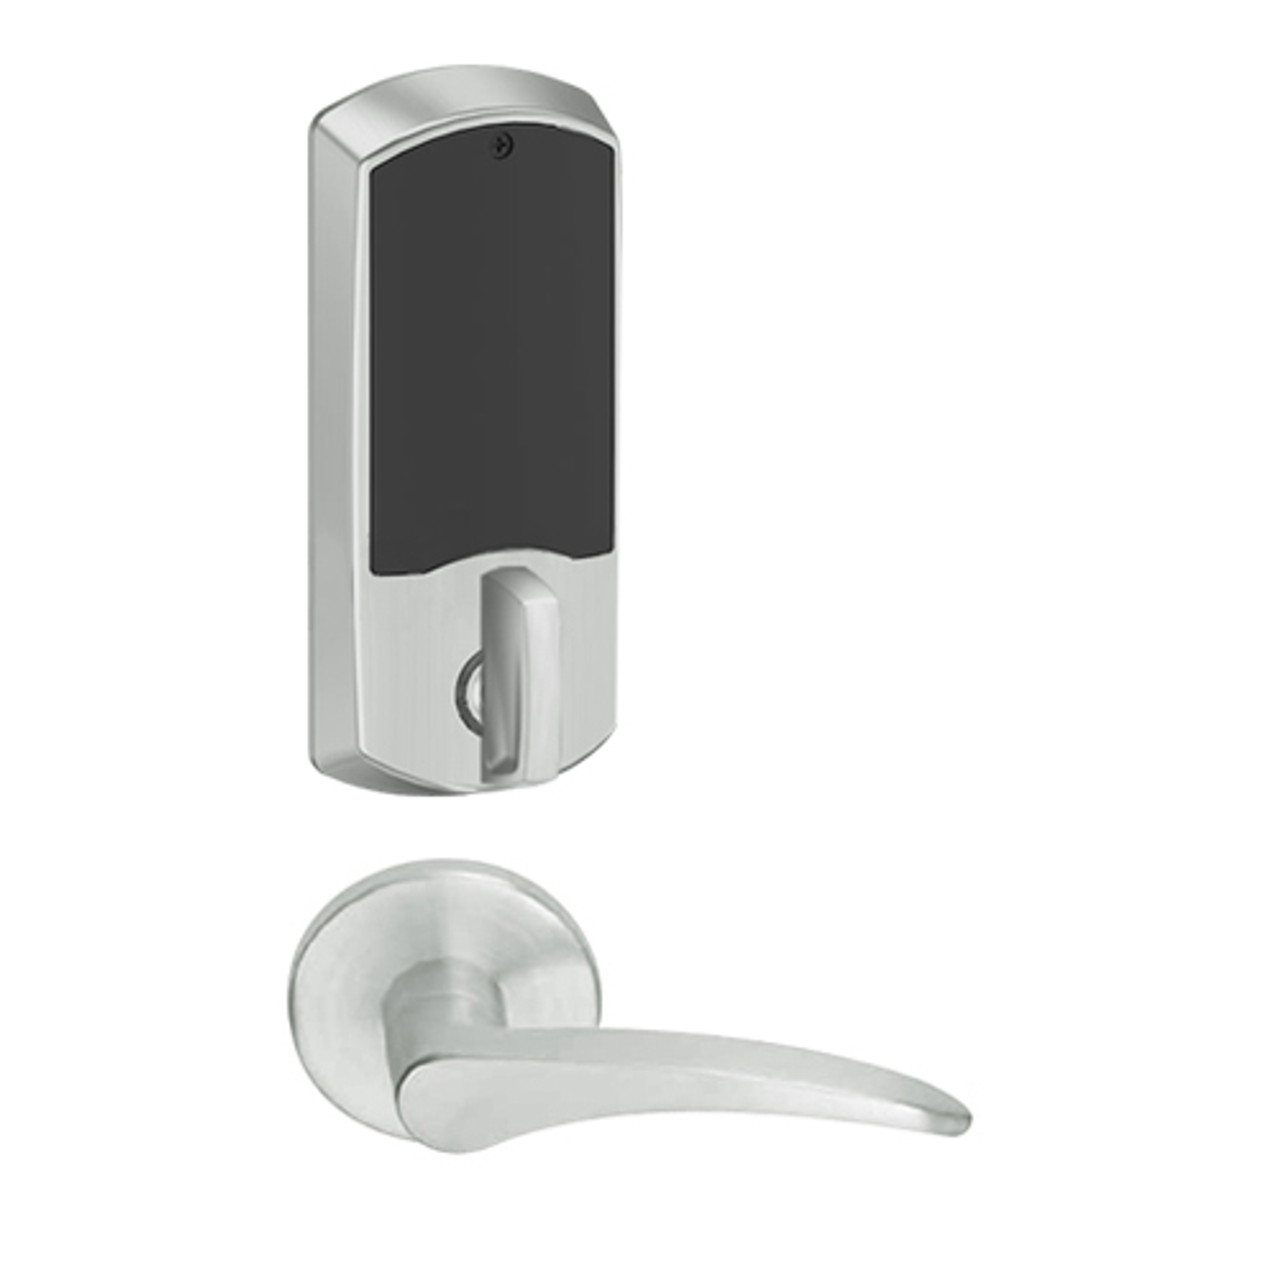 LEMD-GRW-L-12-619-00B-LH Schlage Less Cylinder Privacy/Apartment Wireless Greenwich Mortise Deadbolt Lock with LED and 12 Lever in Satin Nickel